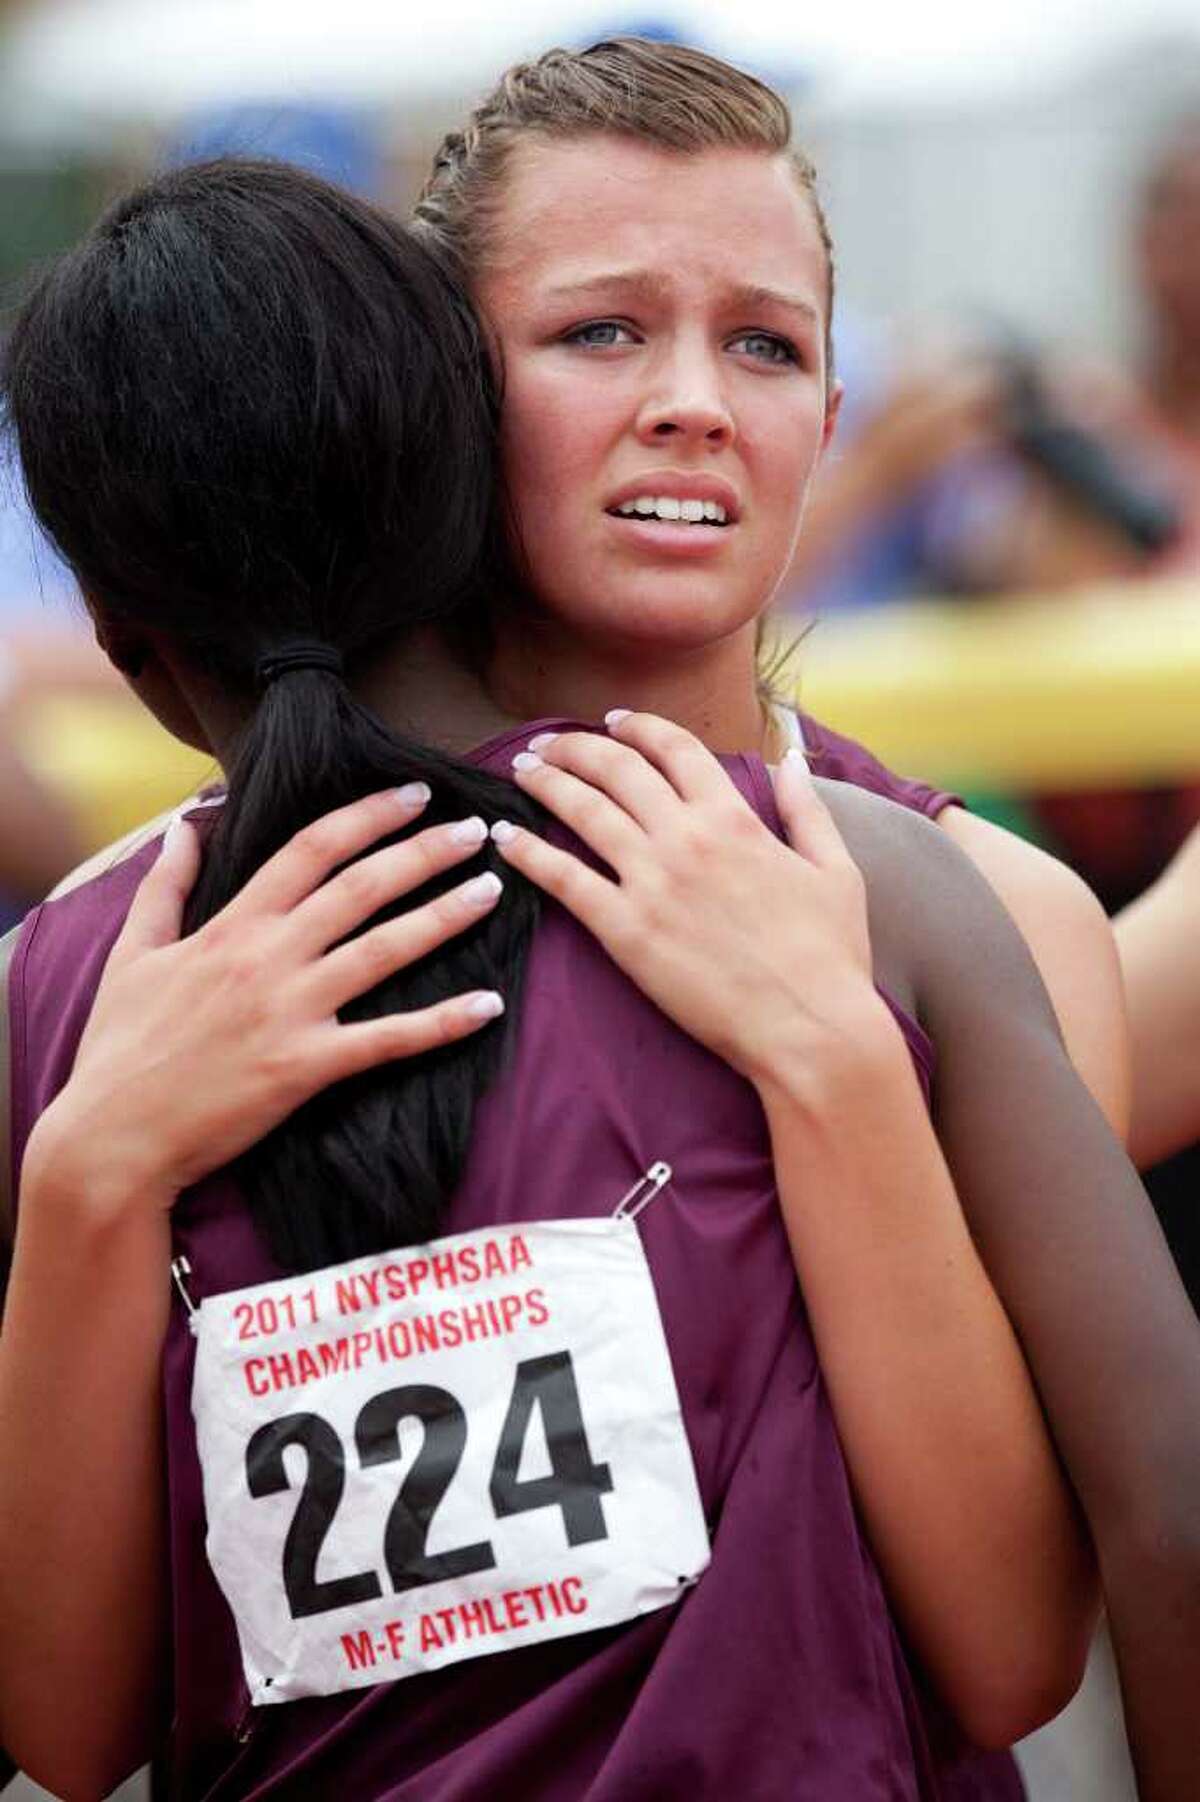 Kristina Lenge and Uwa Omorogbe embrace after their loss in the 4x400 at the New York State Track and Field Championships. (Brett Carlsen/Special to the Times Union)